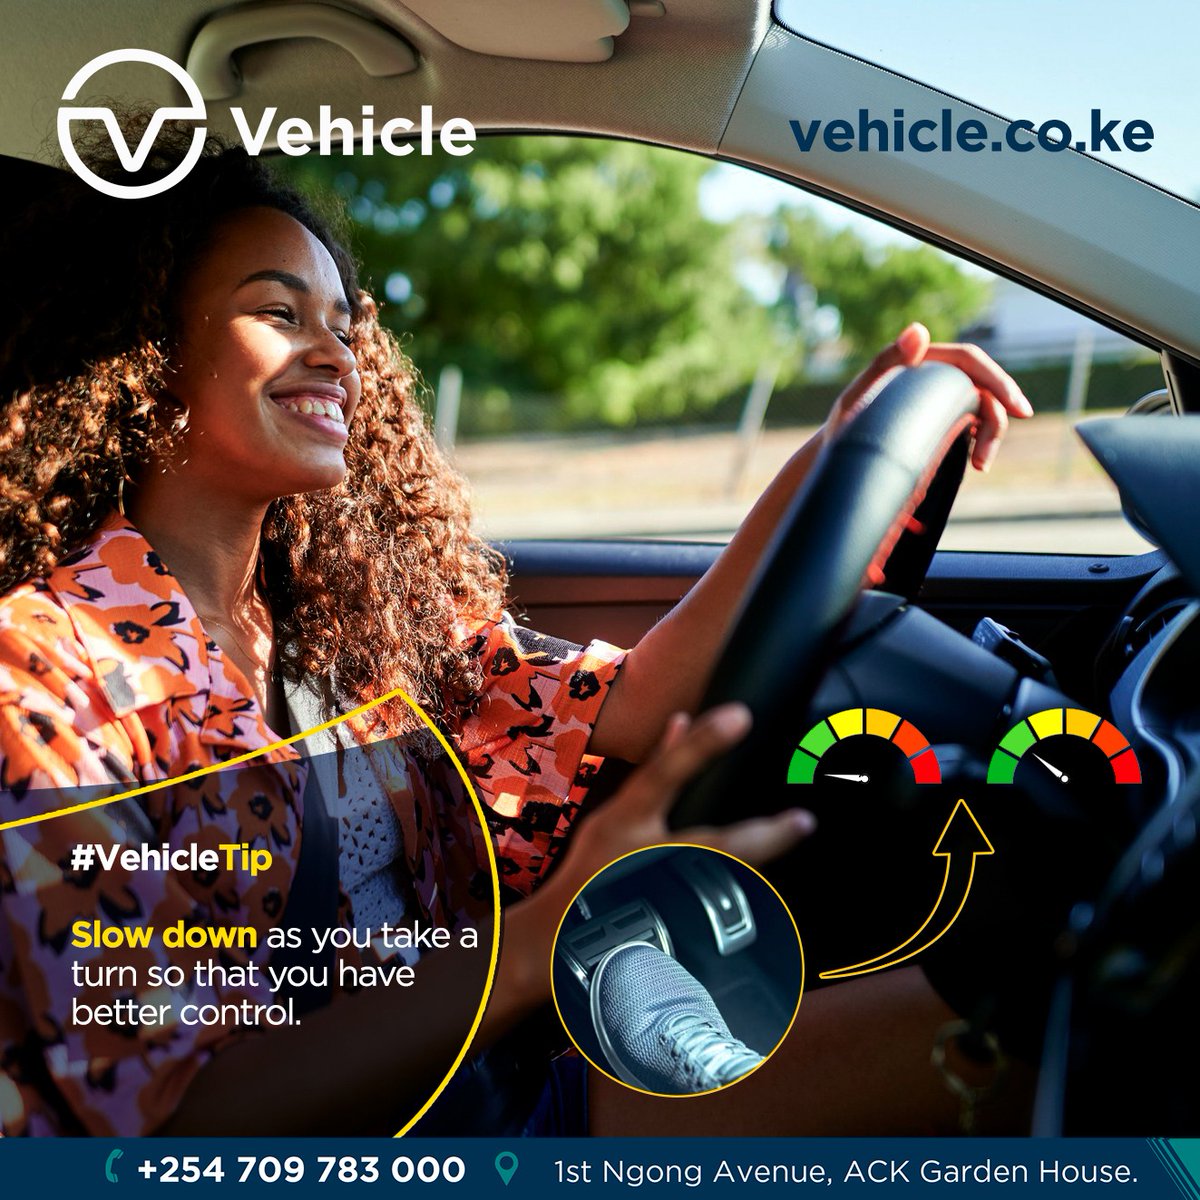 Life is a journey, enjoy the ride.  Don’t just live for the destination.

Take that turn slowly!

#VehicleTip #VehicleInsurance #Roadsafety #Kenyans #Insurancecover